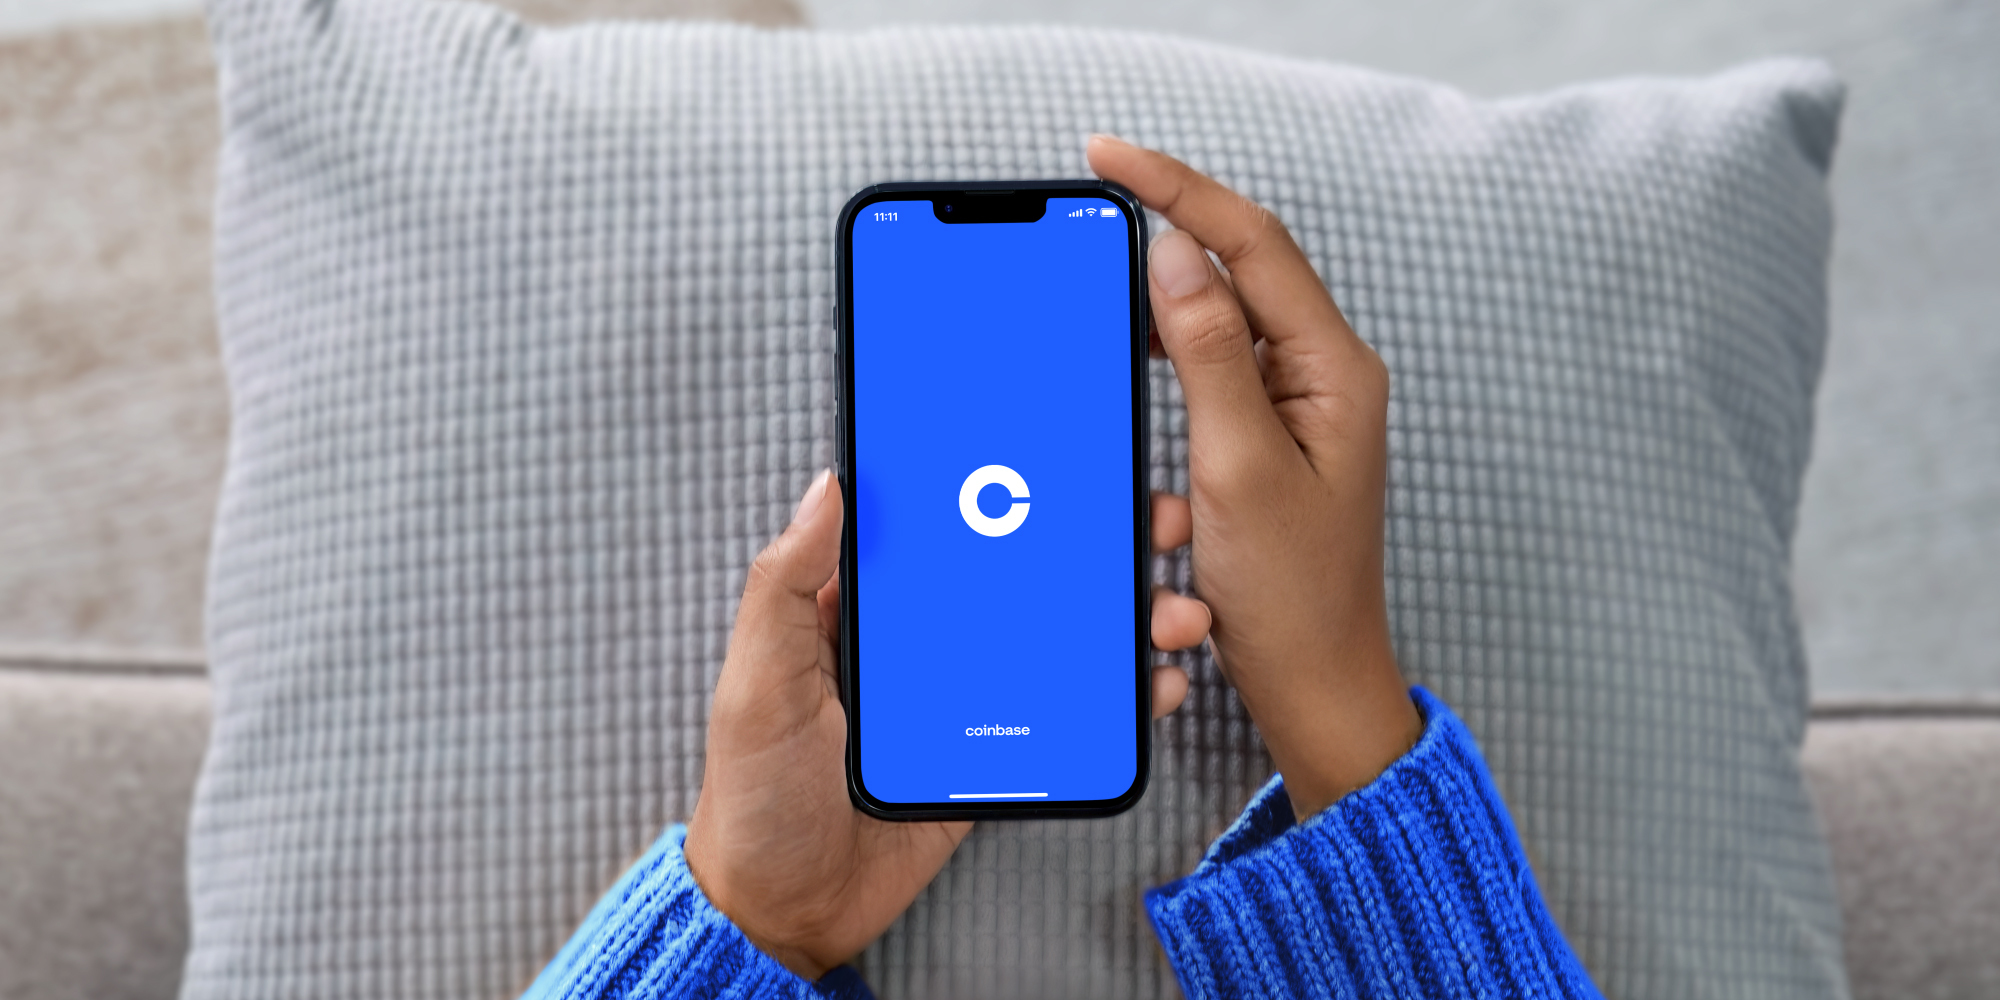 [BRANDED CONTENT] COINBASE